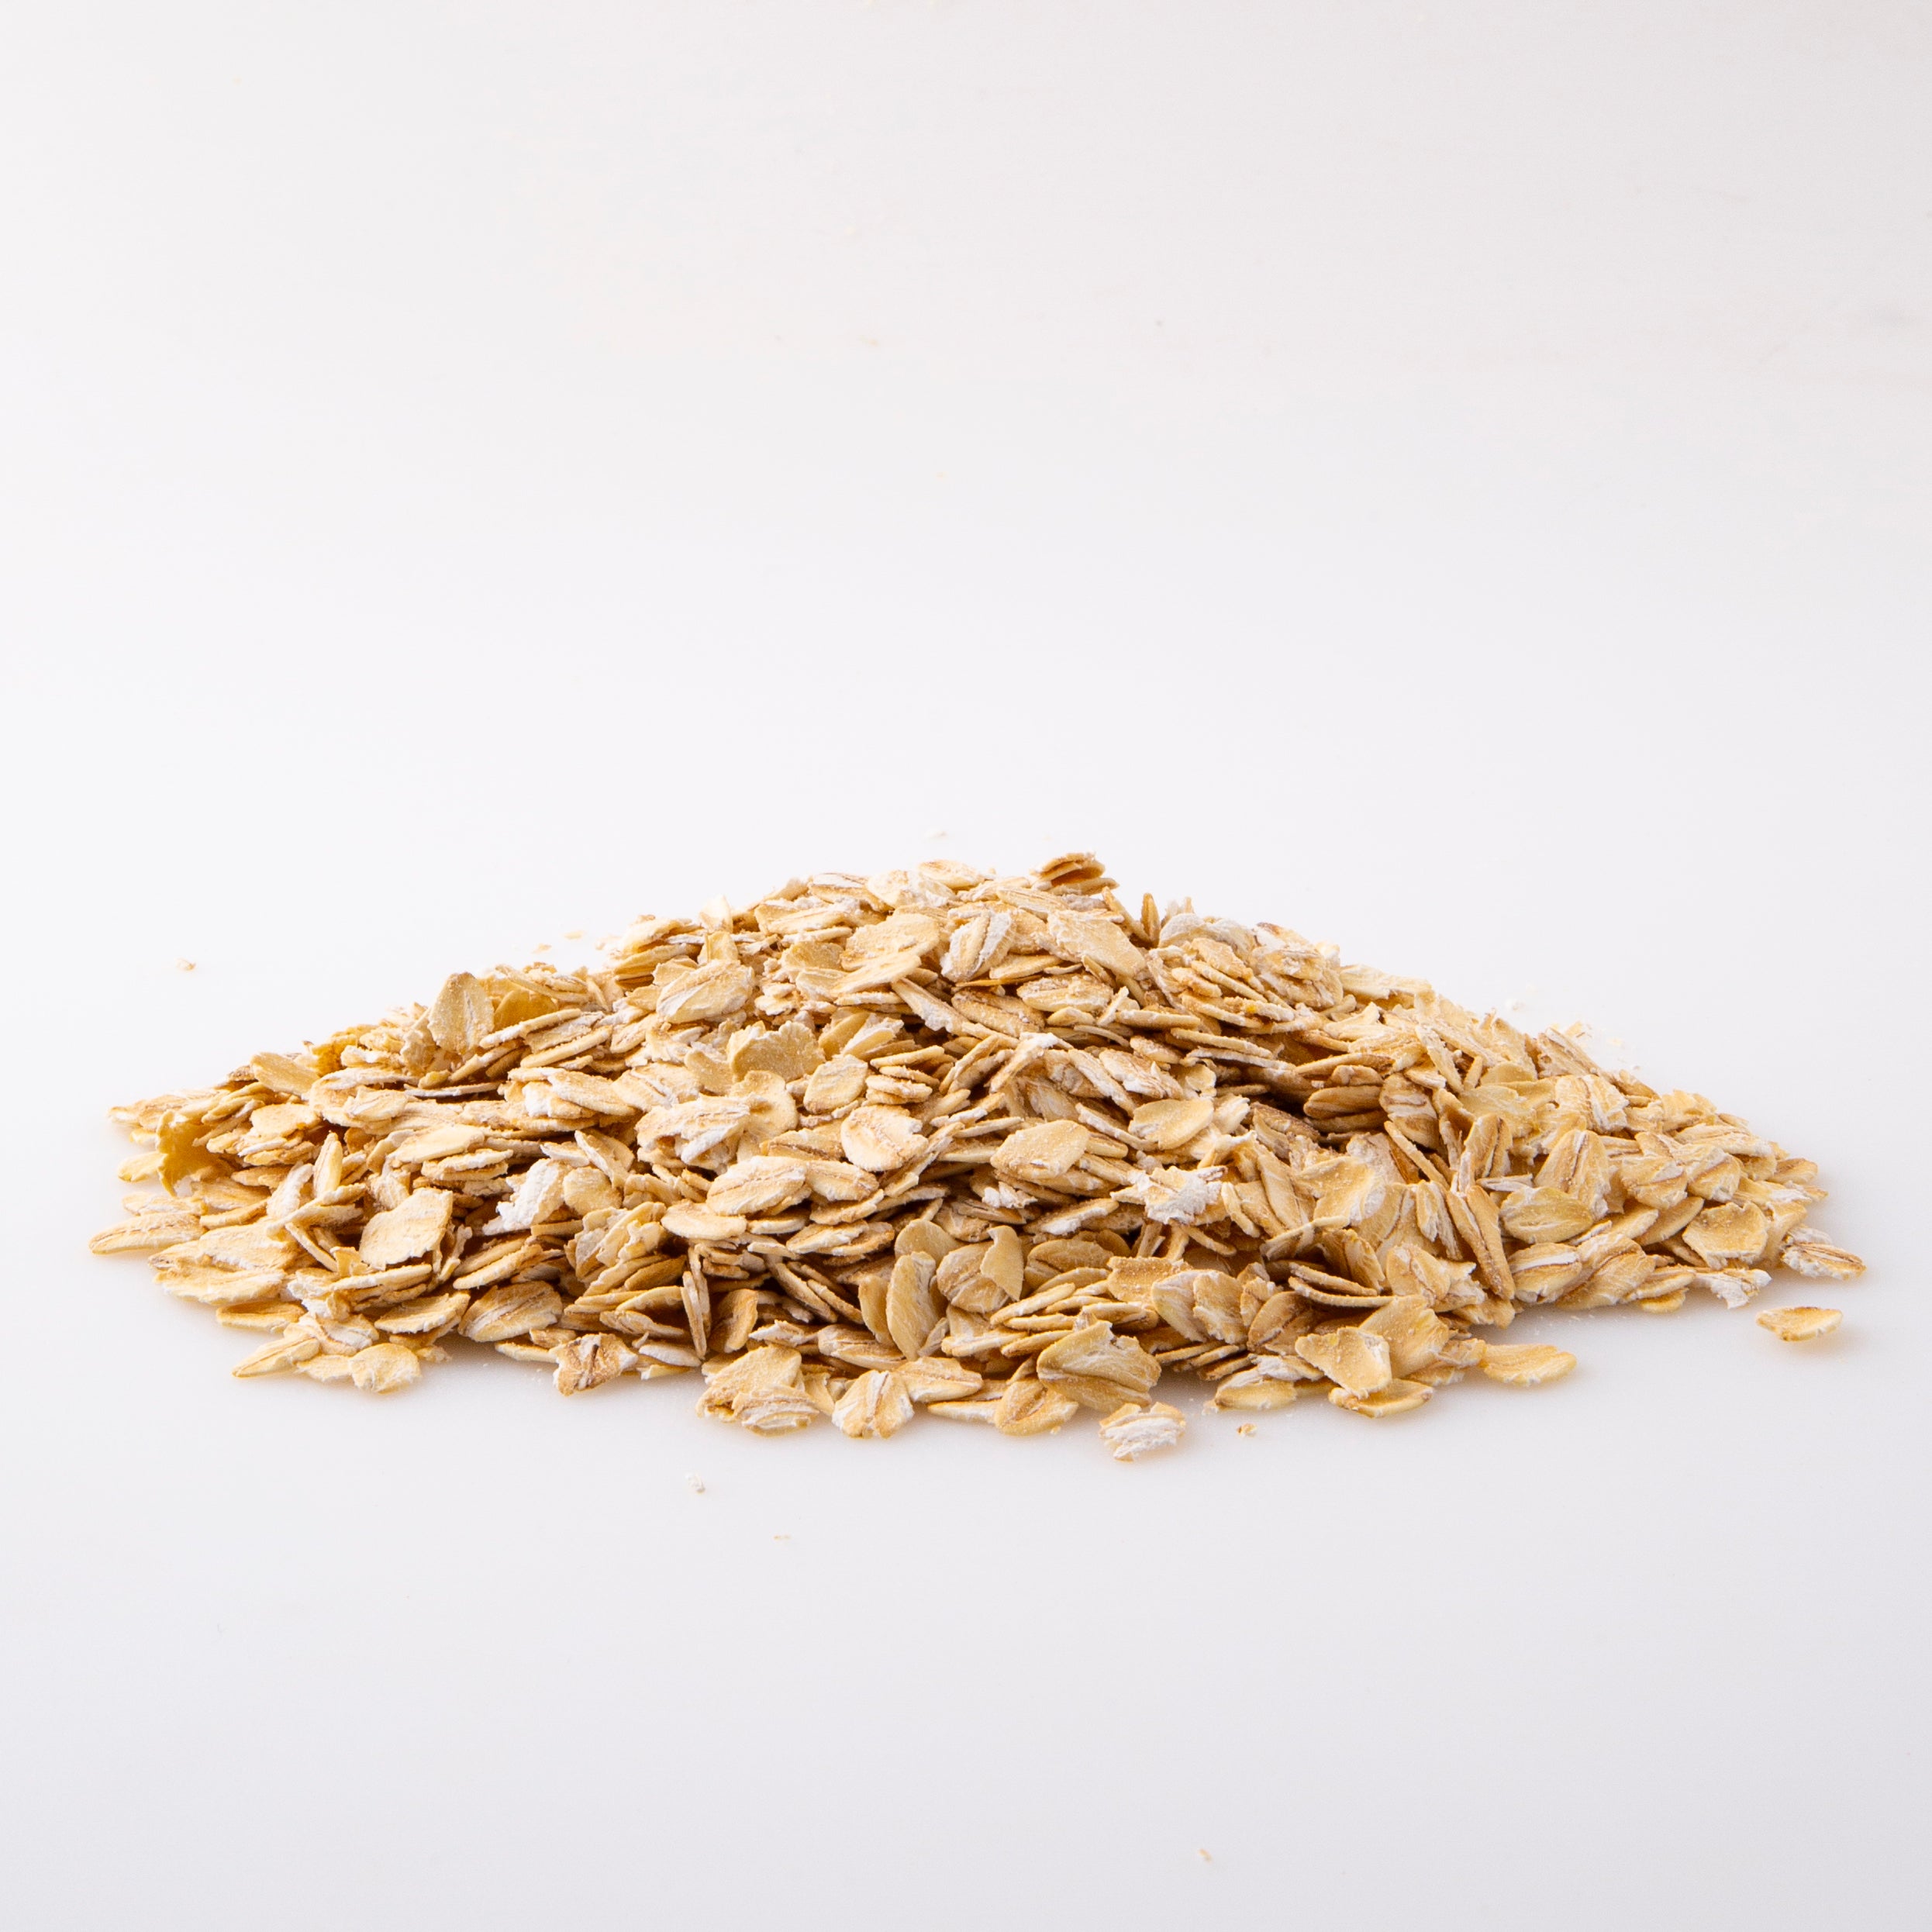 Organic Oats - Uncontaminated (Cereals) Image 3 - Naked Foods